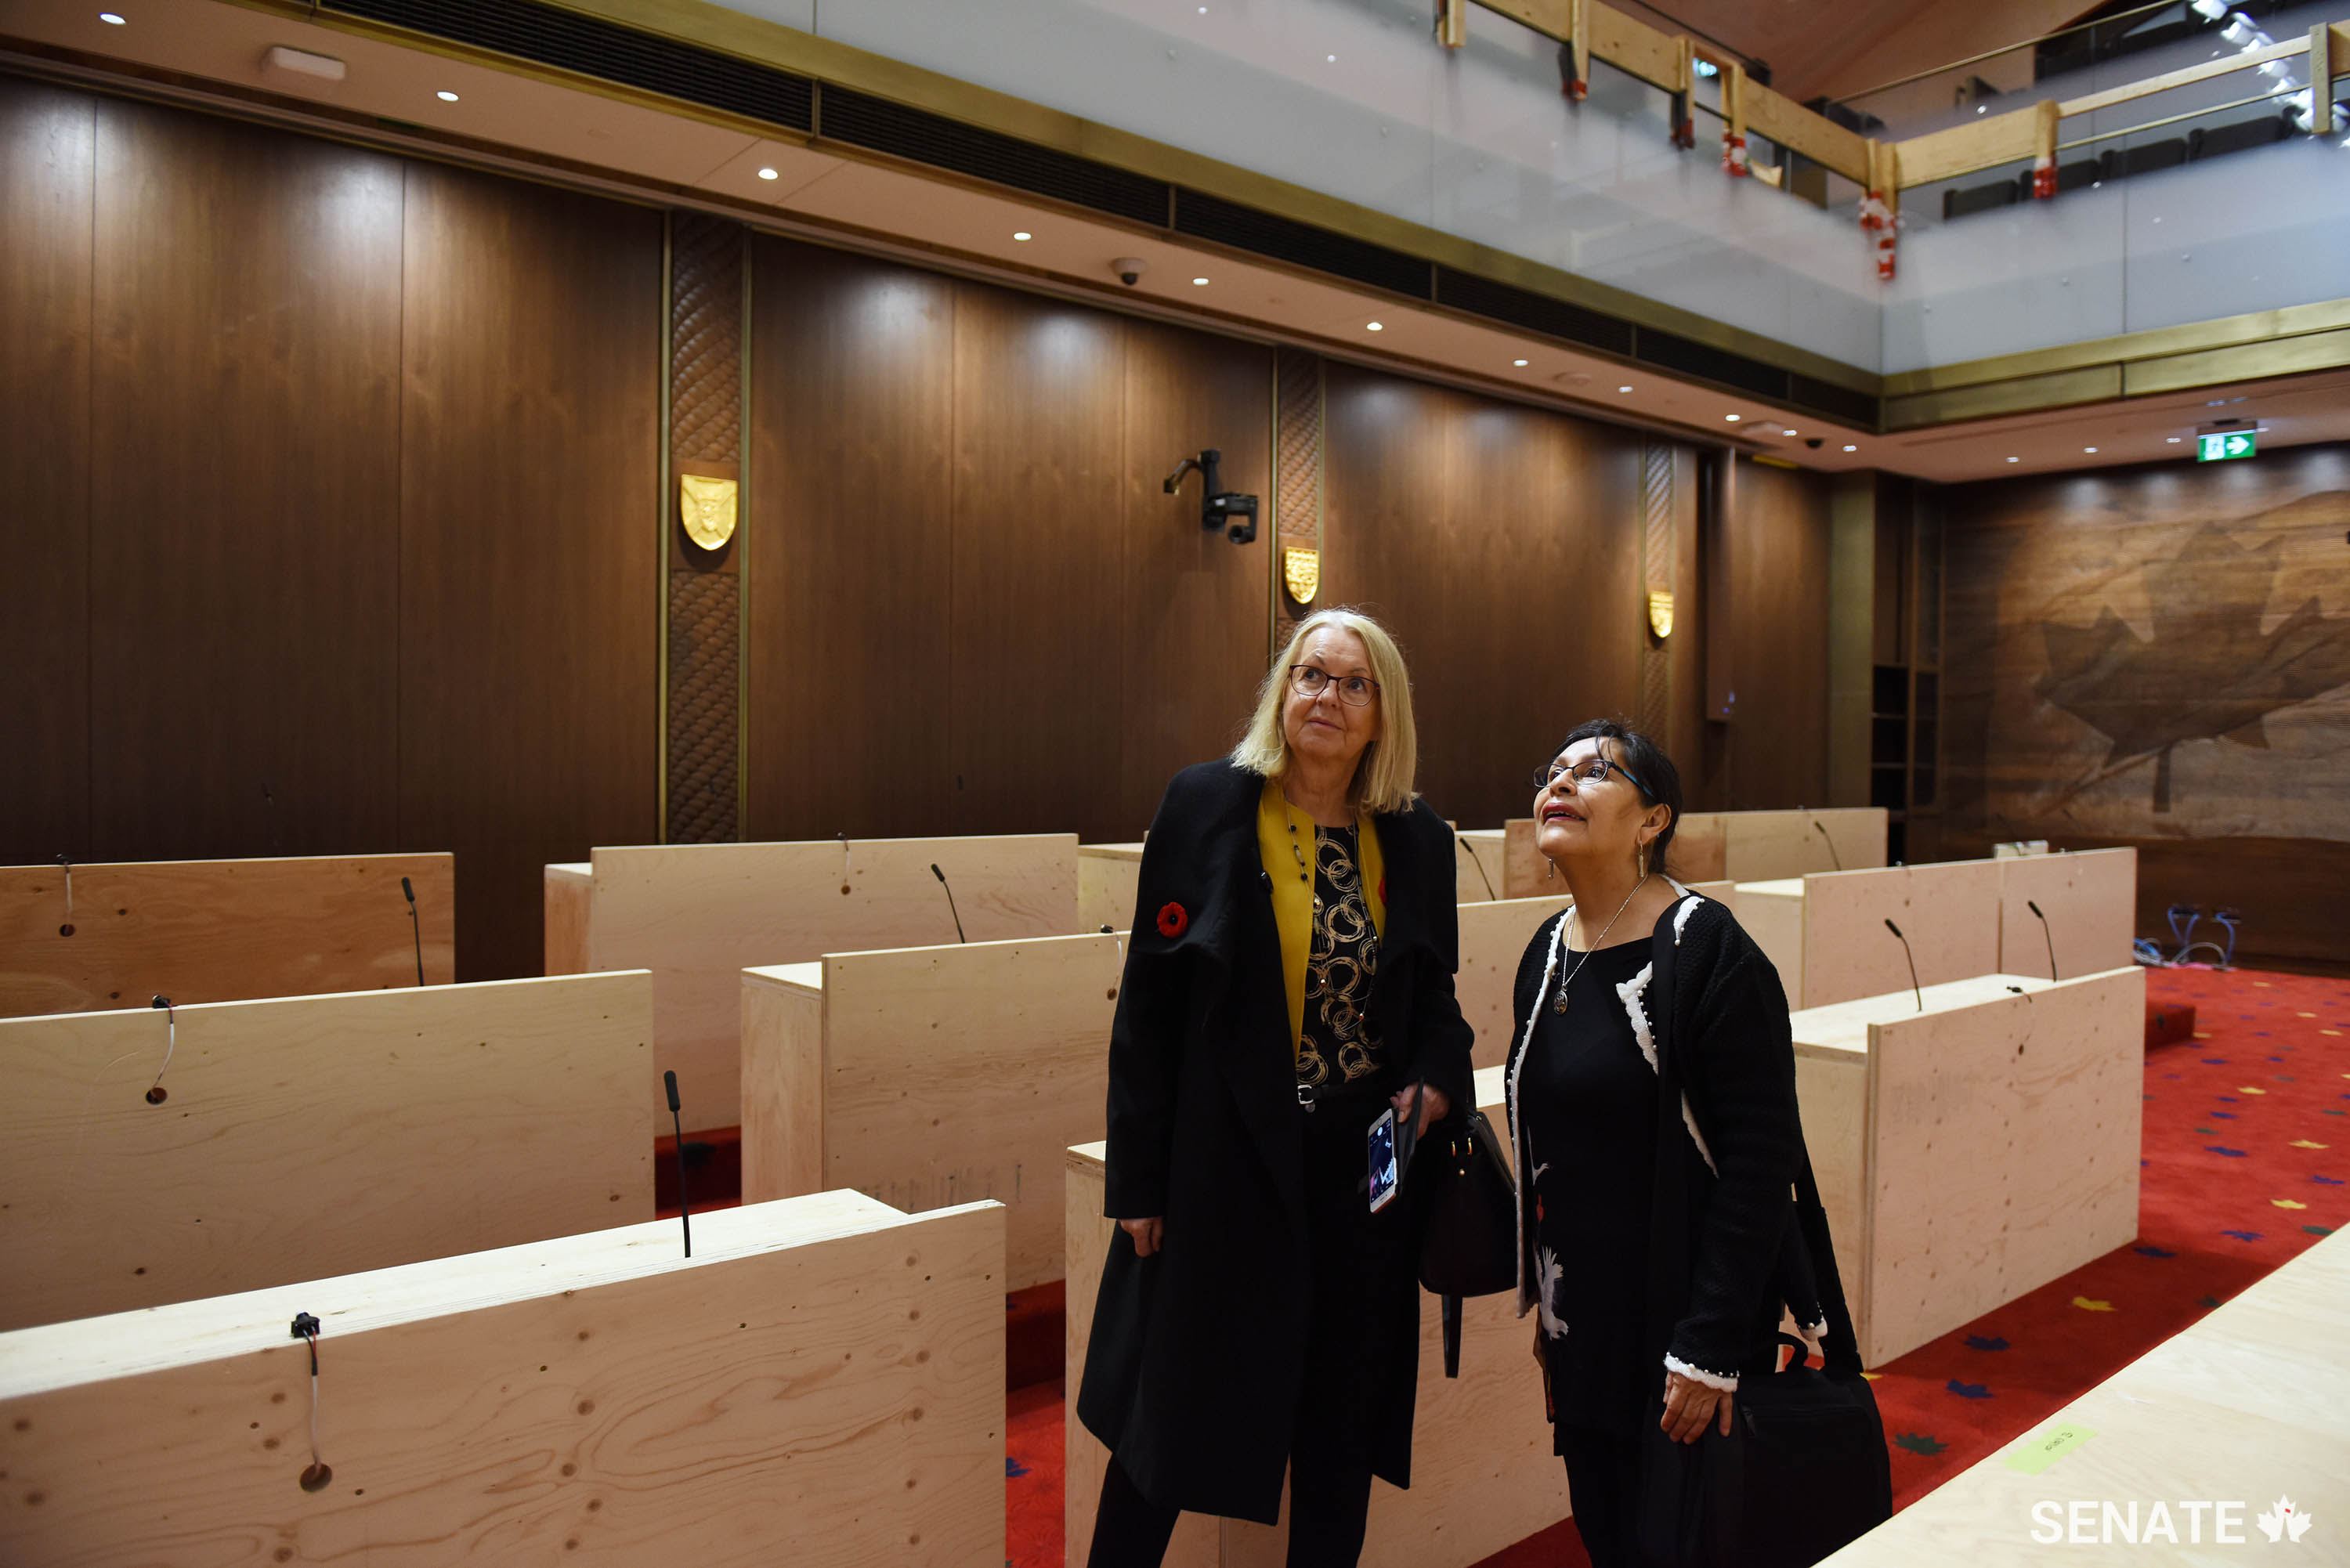 Senators Cordy and Galvez take in the new Senate Chamber, designed for optimal energy efficiency.